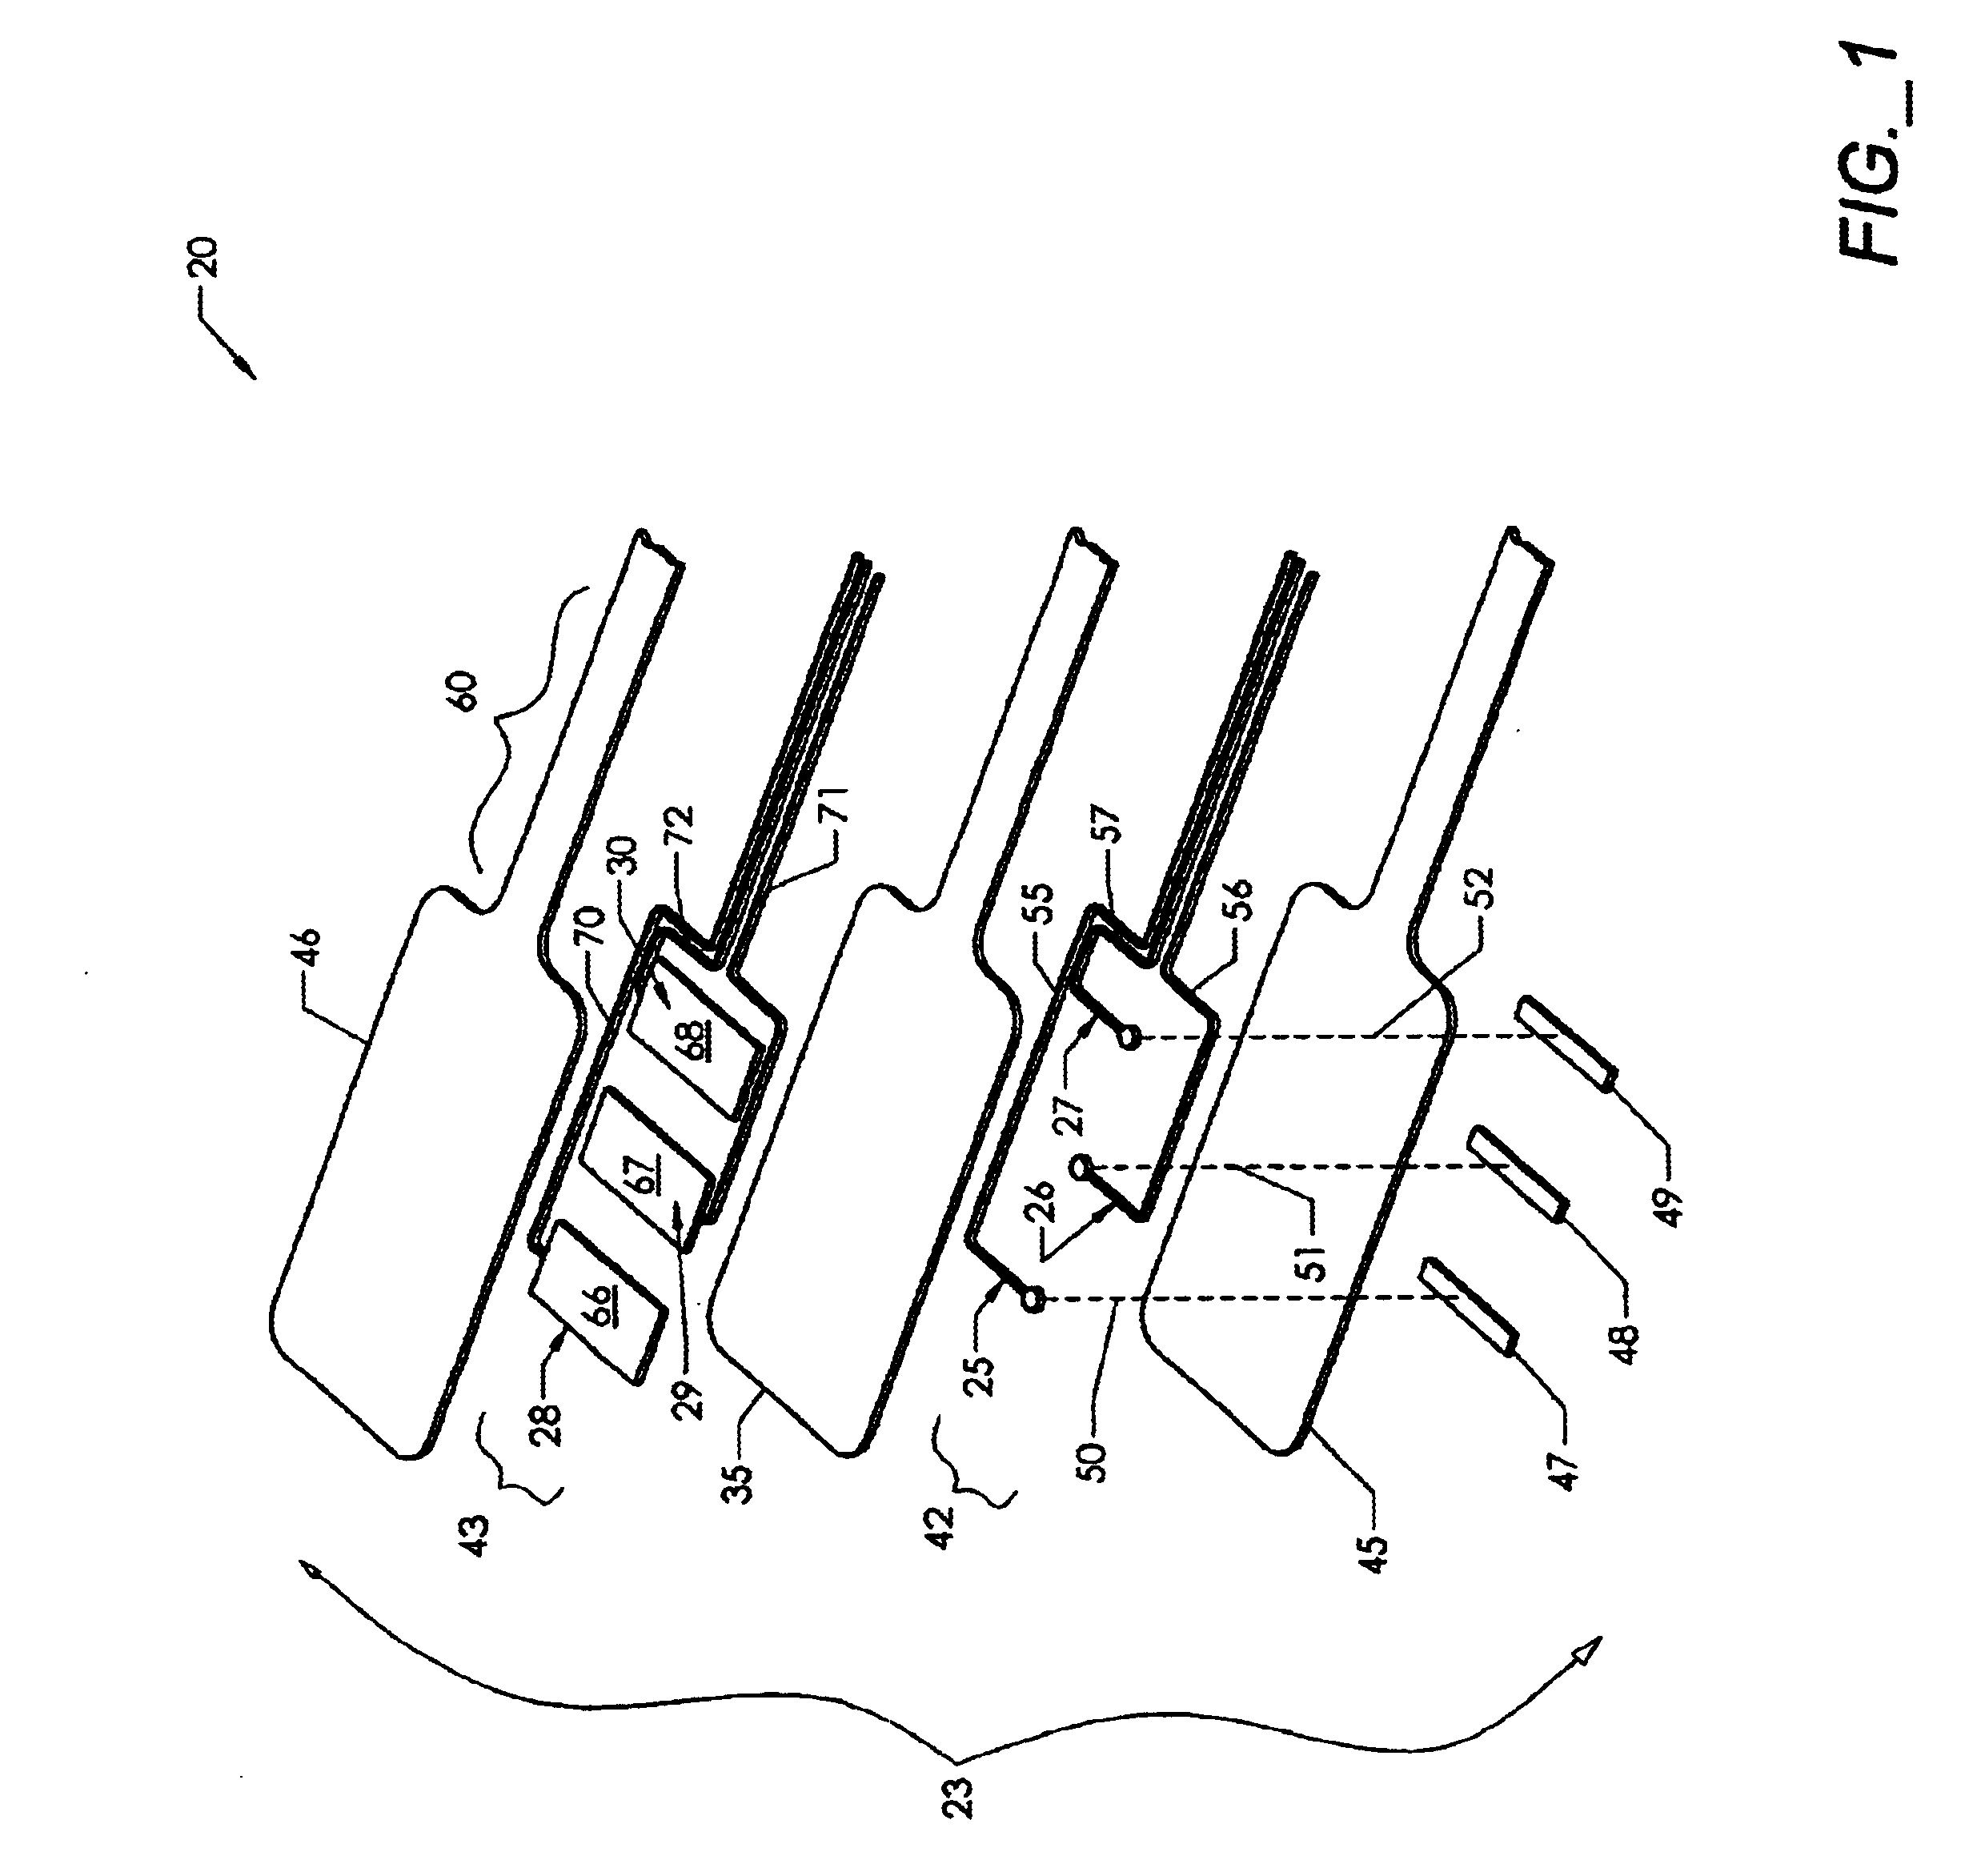 Surface electromyographic electrode assembly